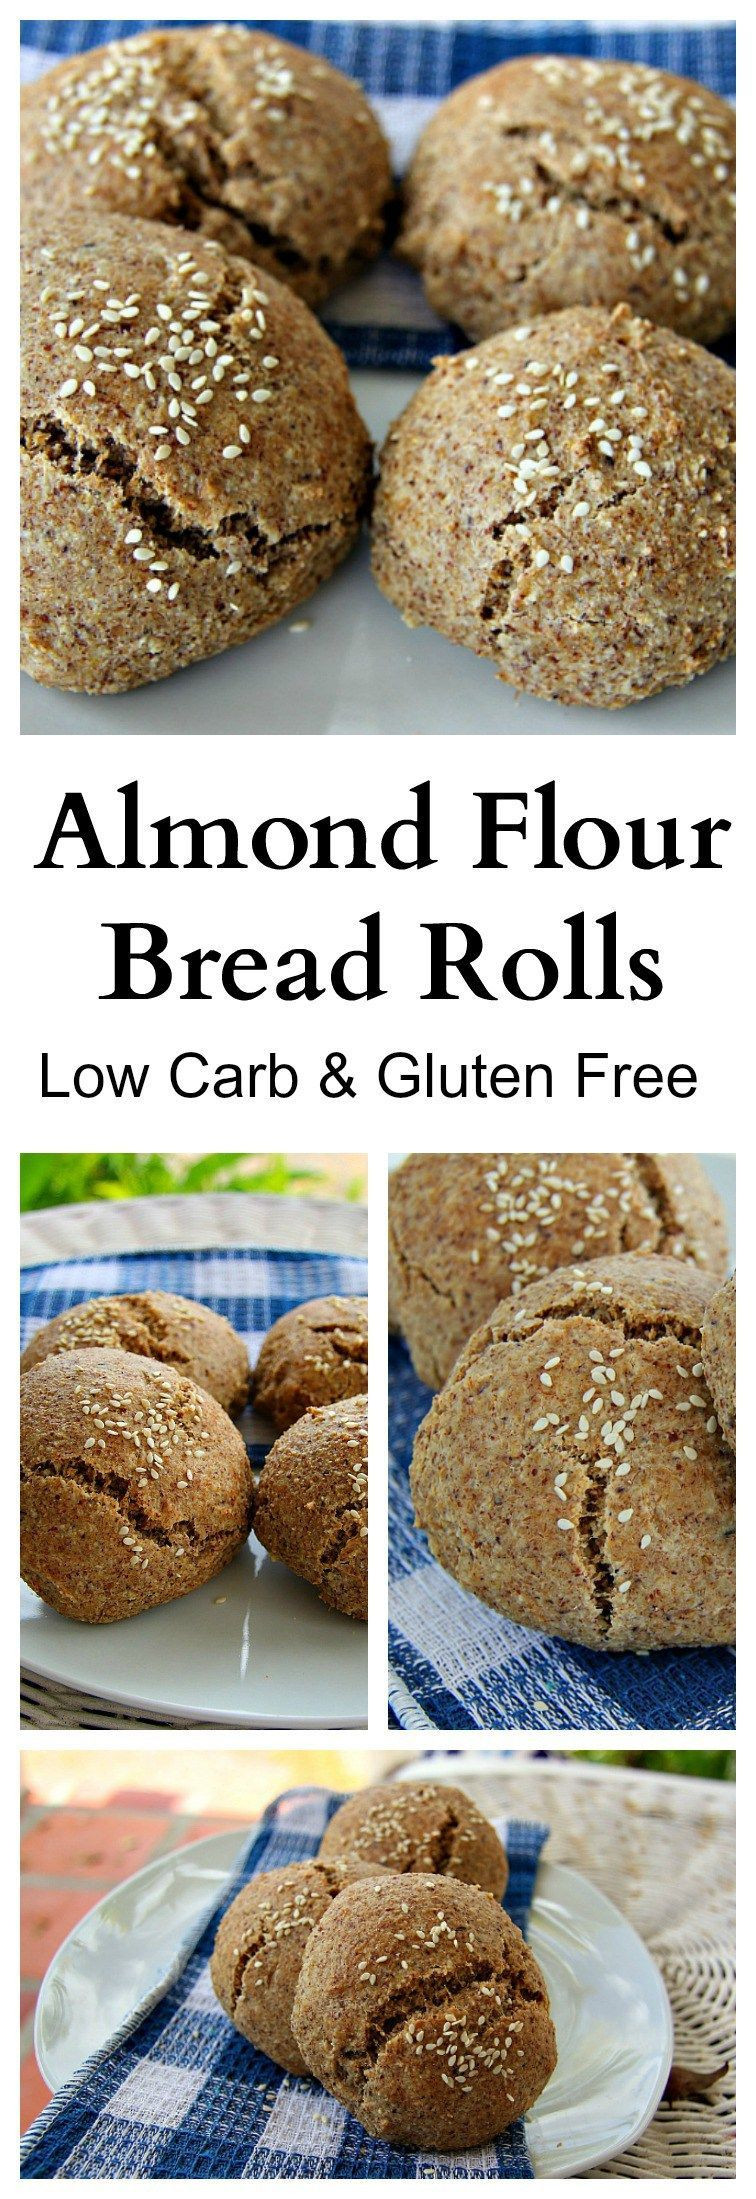 Almond Flour Recipes Indian
 ALMOND FLOUR BREAD ROLLS This low carb and gluten free